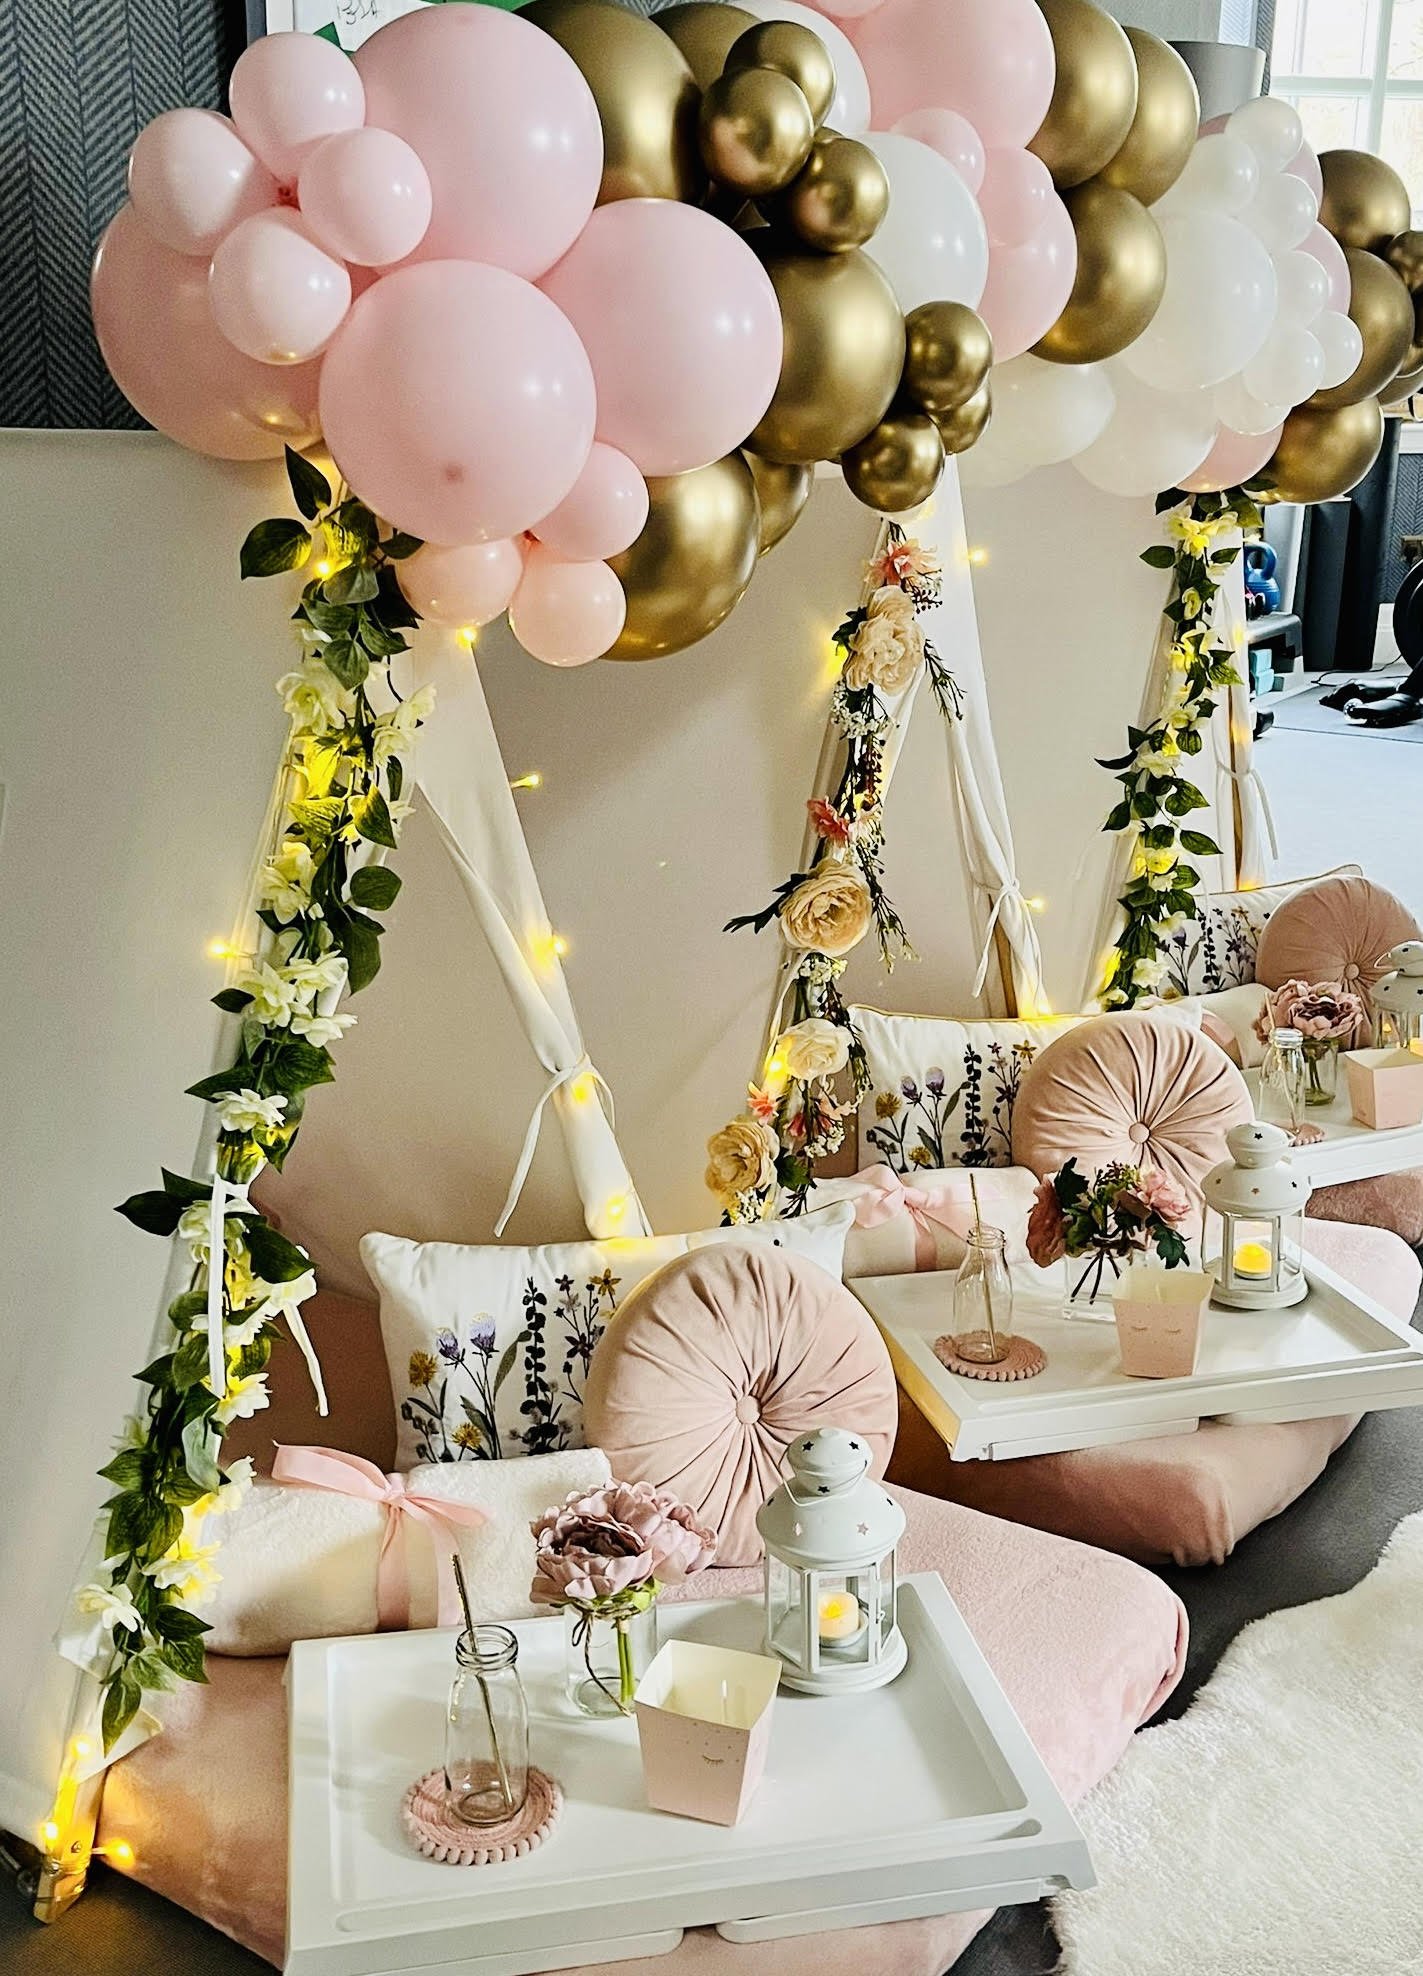 floral teepee with balloons.jpg